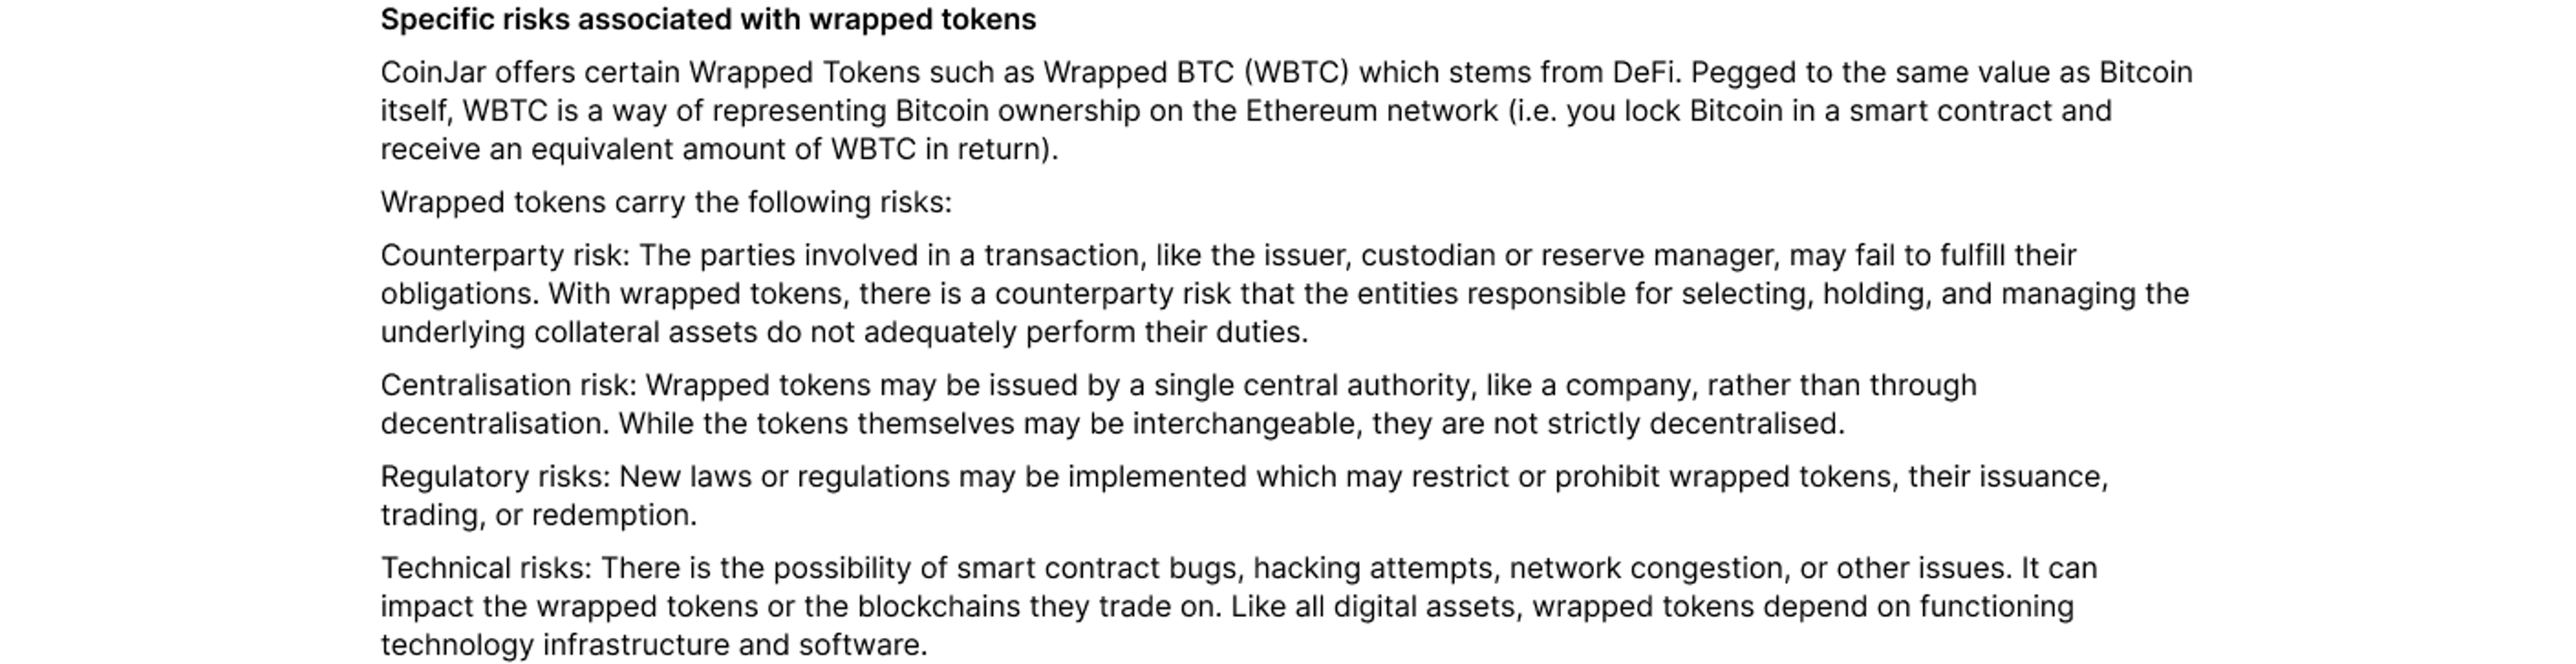 Specific risks associated with wrapped tokens  CoinJar offers certain Wrapped Tokens such as Wrapped BTC (WBTC) which stems from DeFi. Pegged to the same value as Bitcoin itself, WBTC is a way of representing Bitcoin ownership on the Ethereum network (i.e